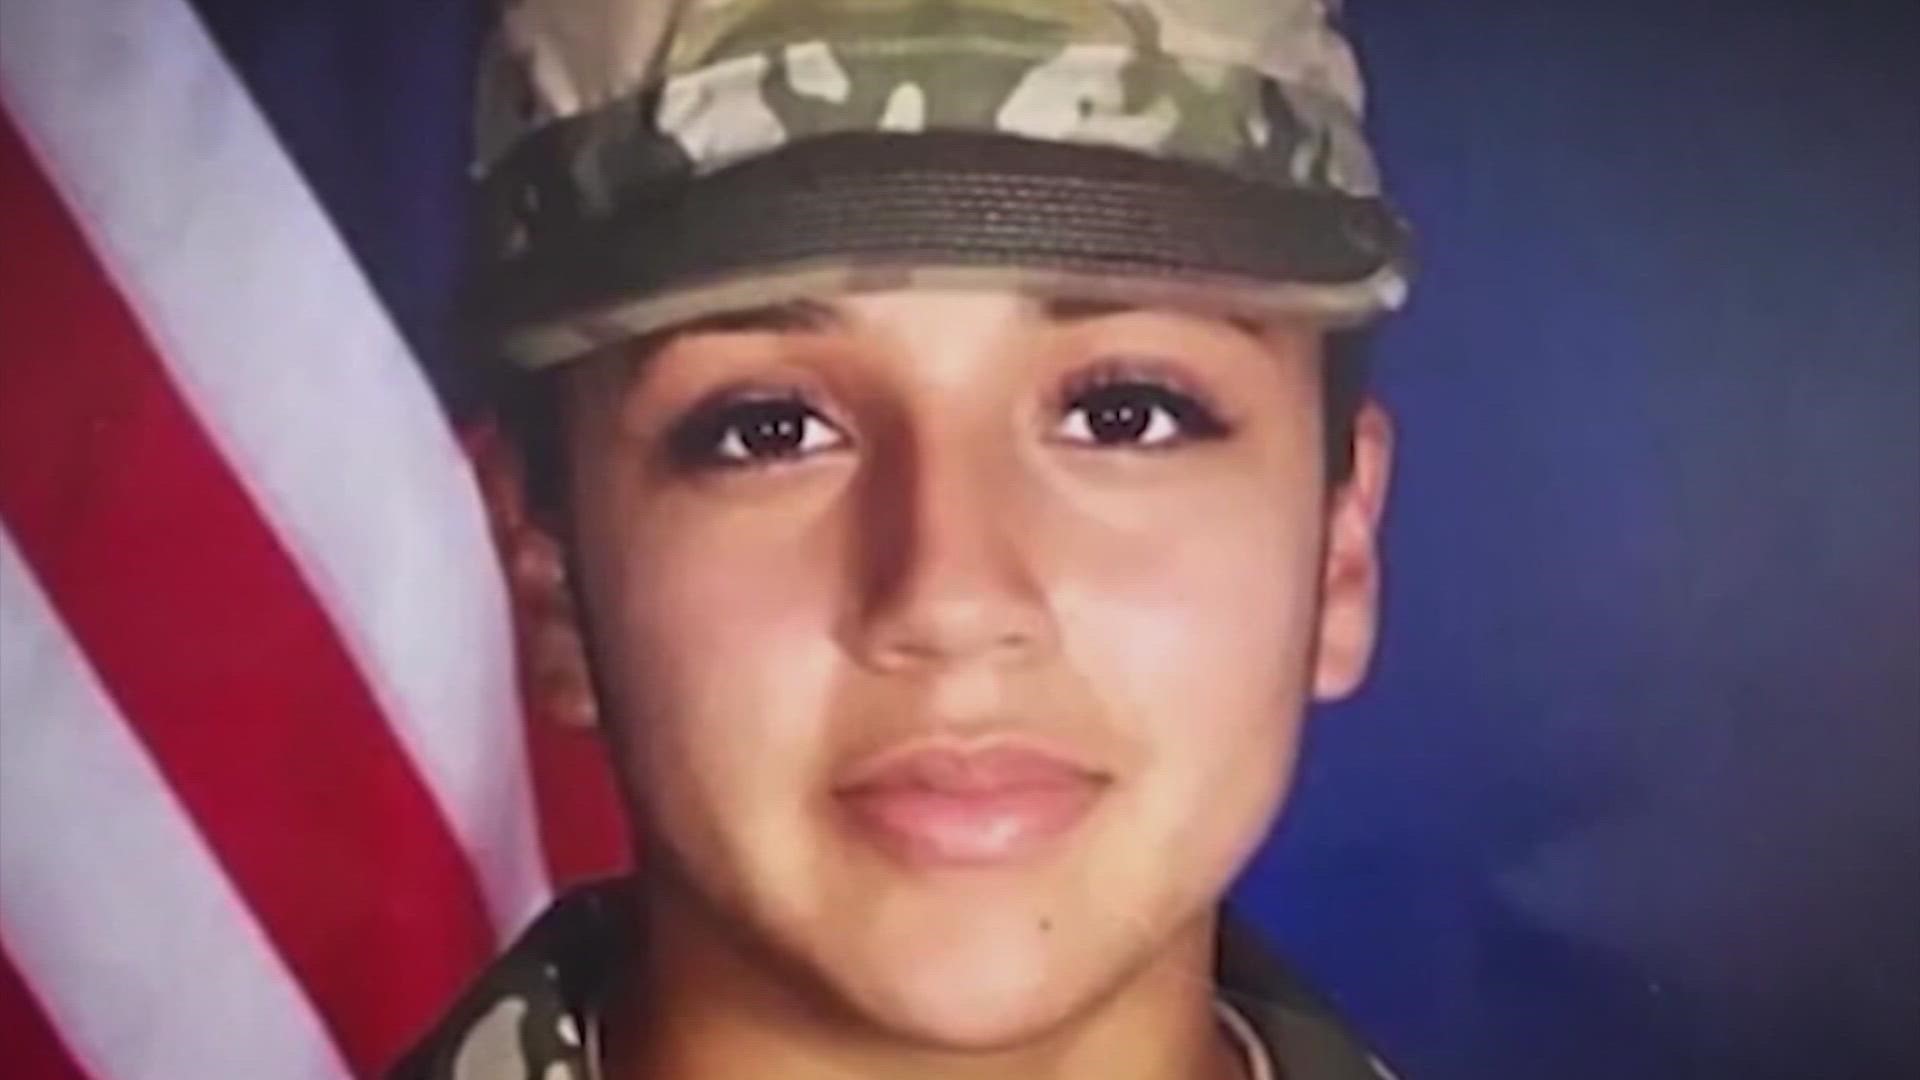 The Houston soldier's family has been advocating for her since her murder in 2020.